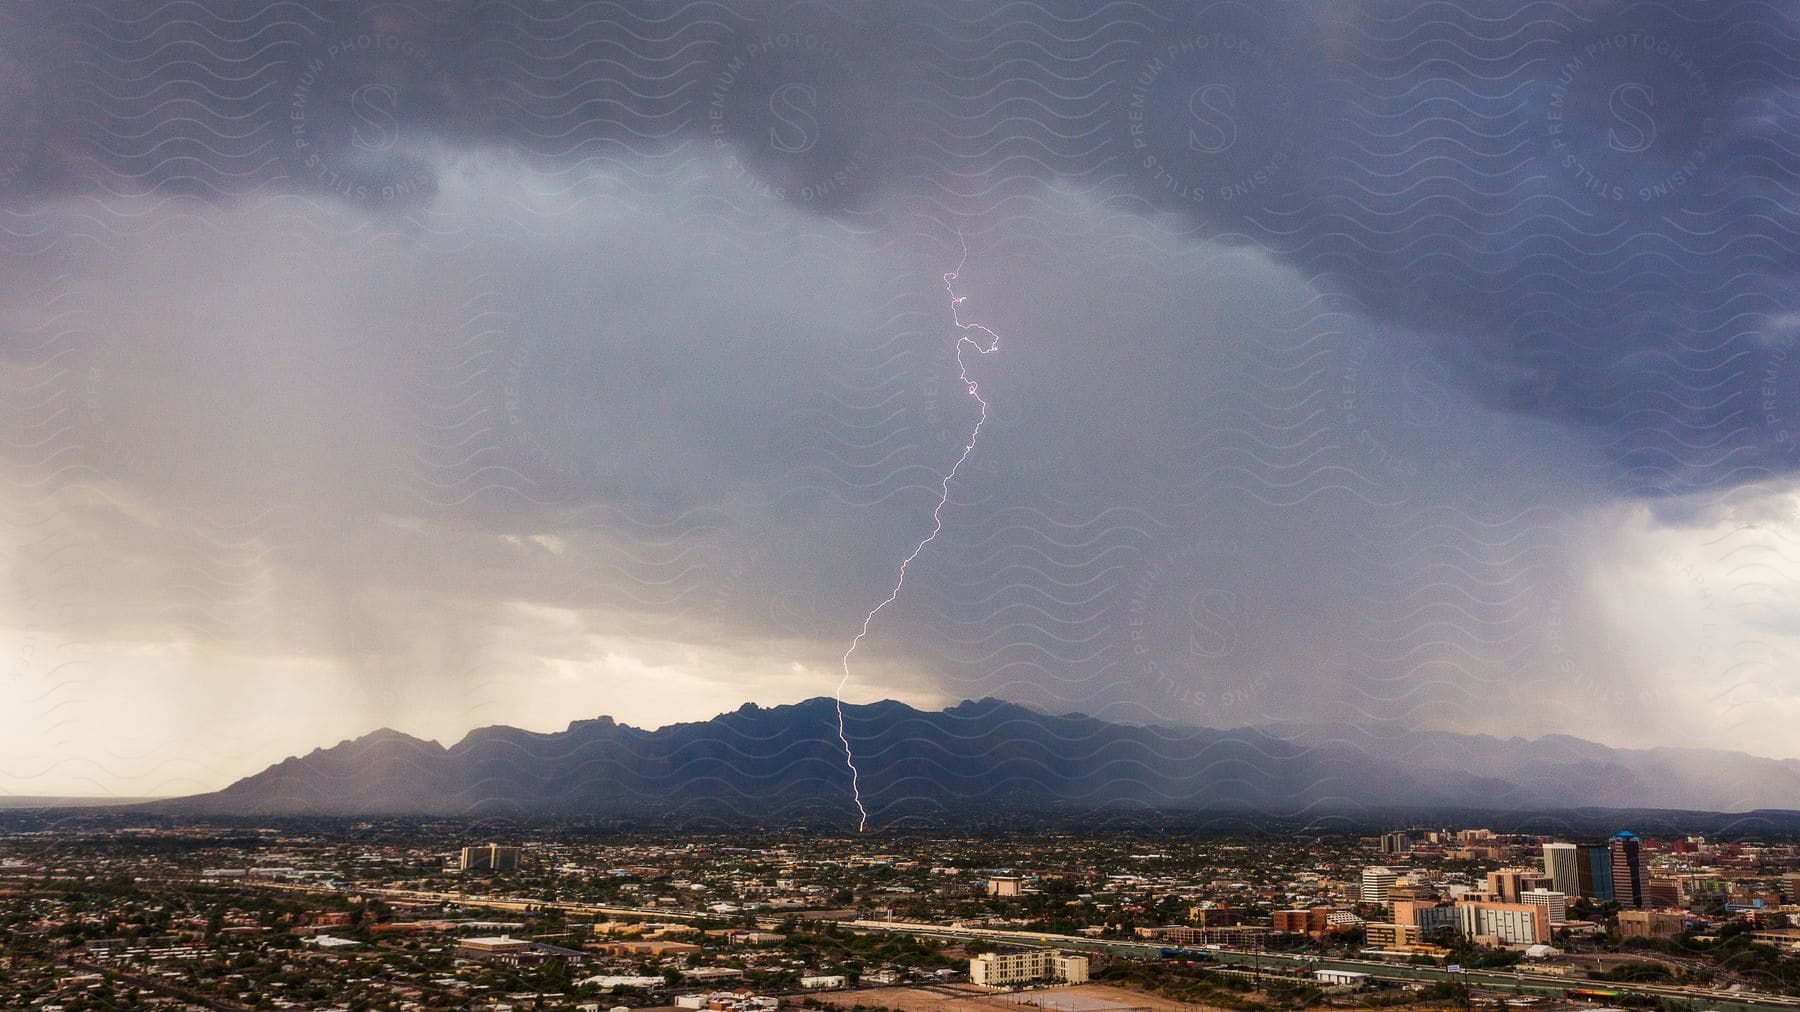 Lightning bolt strikes near a town under thick clouds with mountains and bright sky in the background at dusk